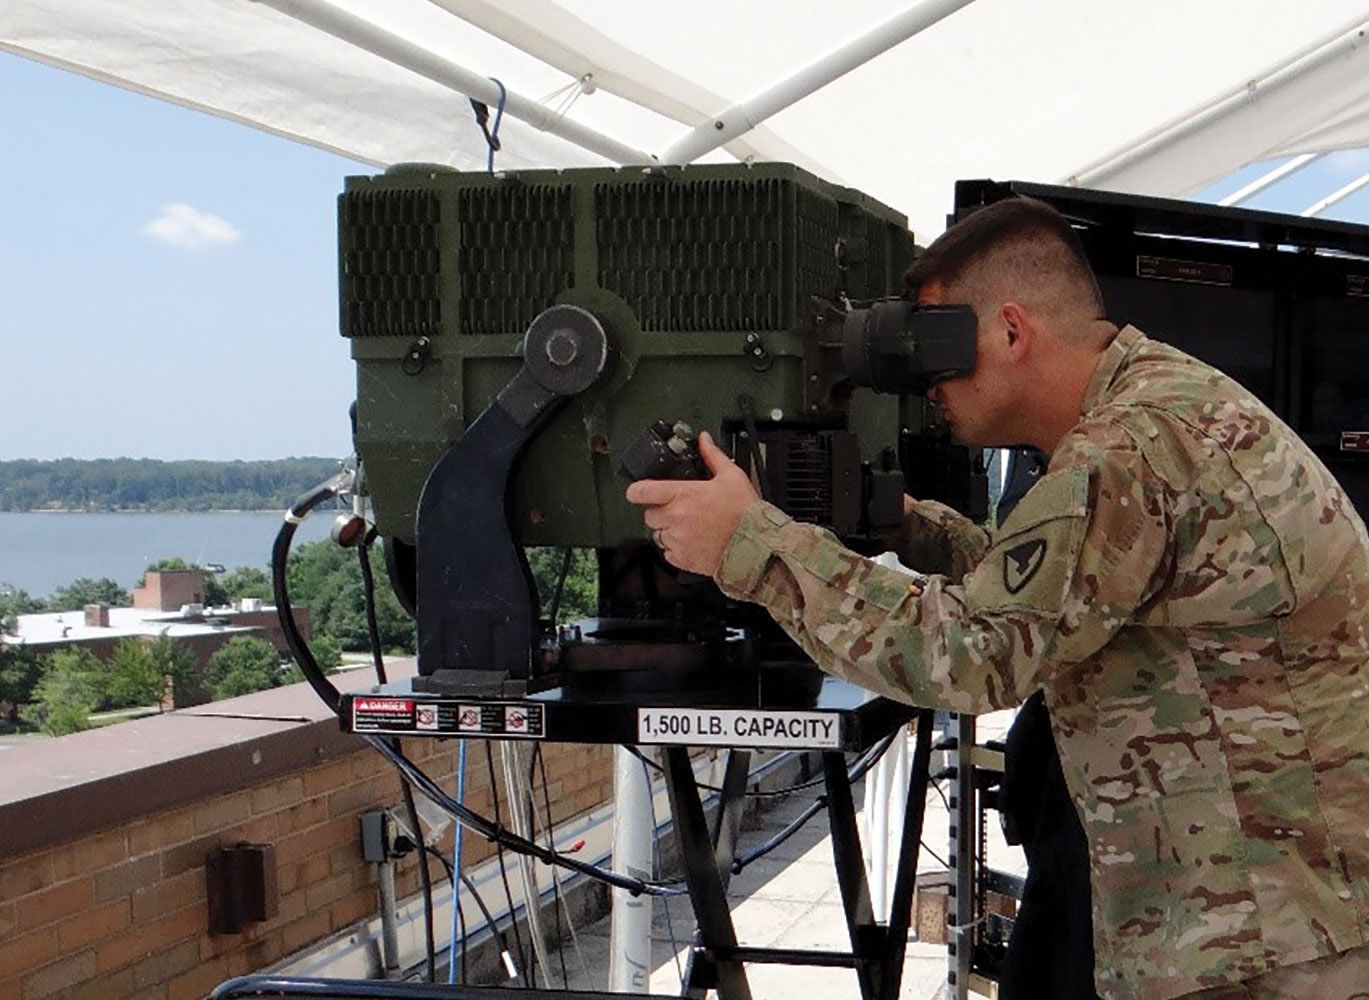 A soldier views the 3rd GEN FLIR system's capabilities. The system enables greater speed, precision and range in the targeting process.